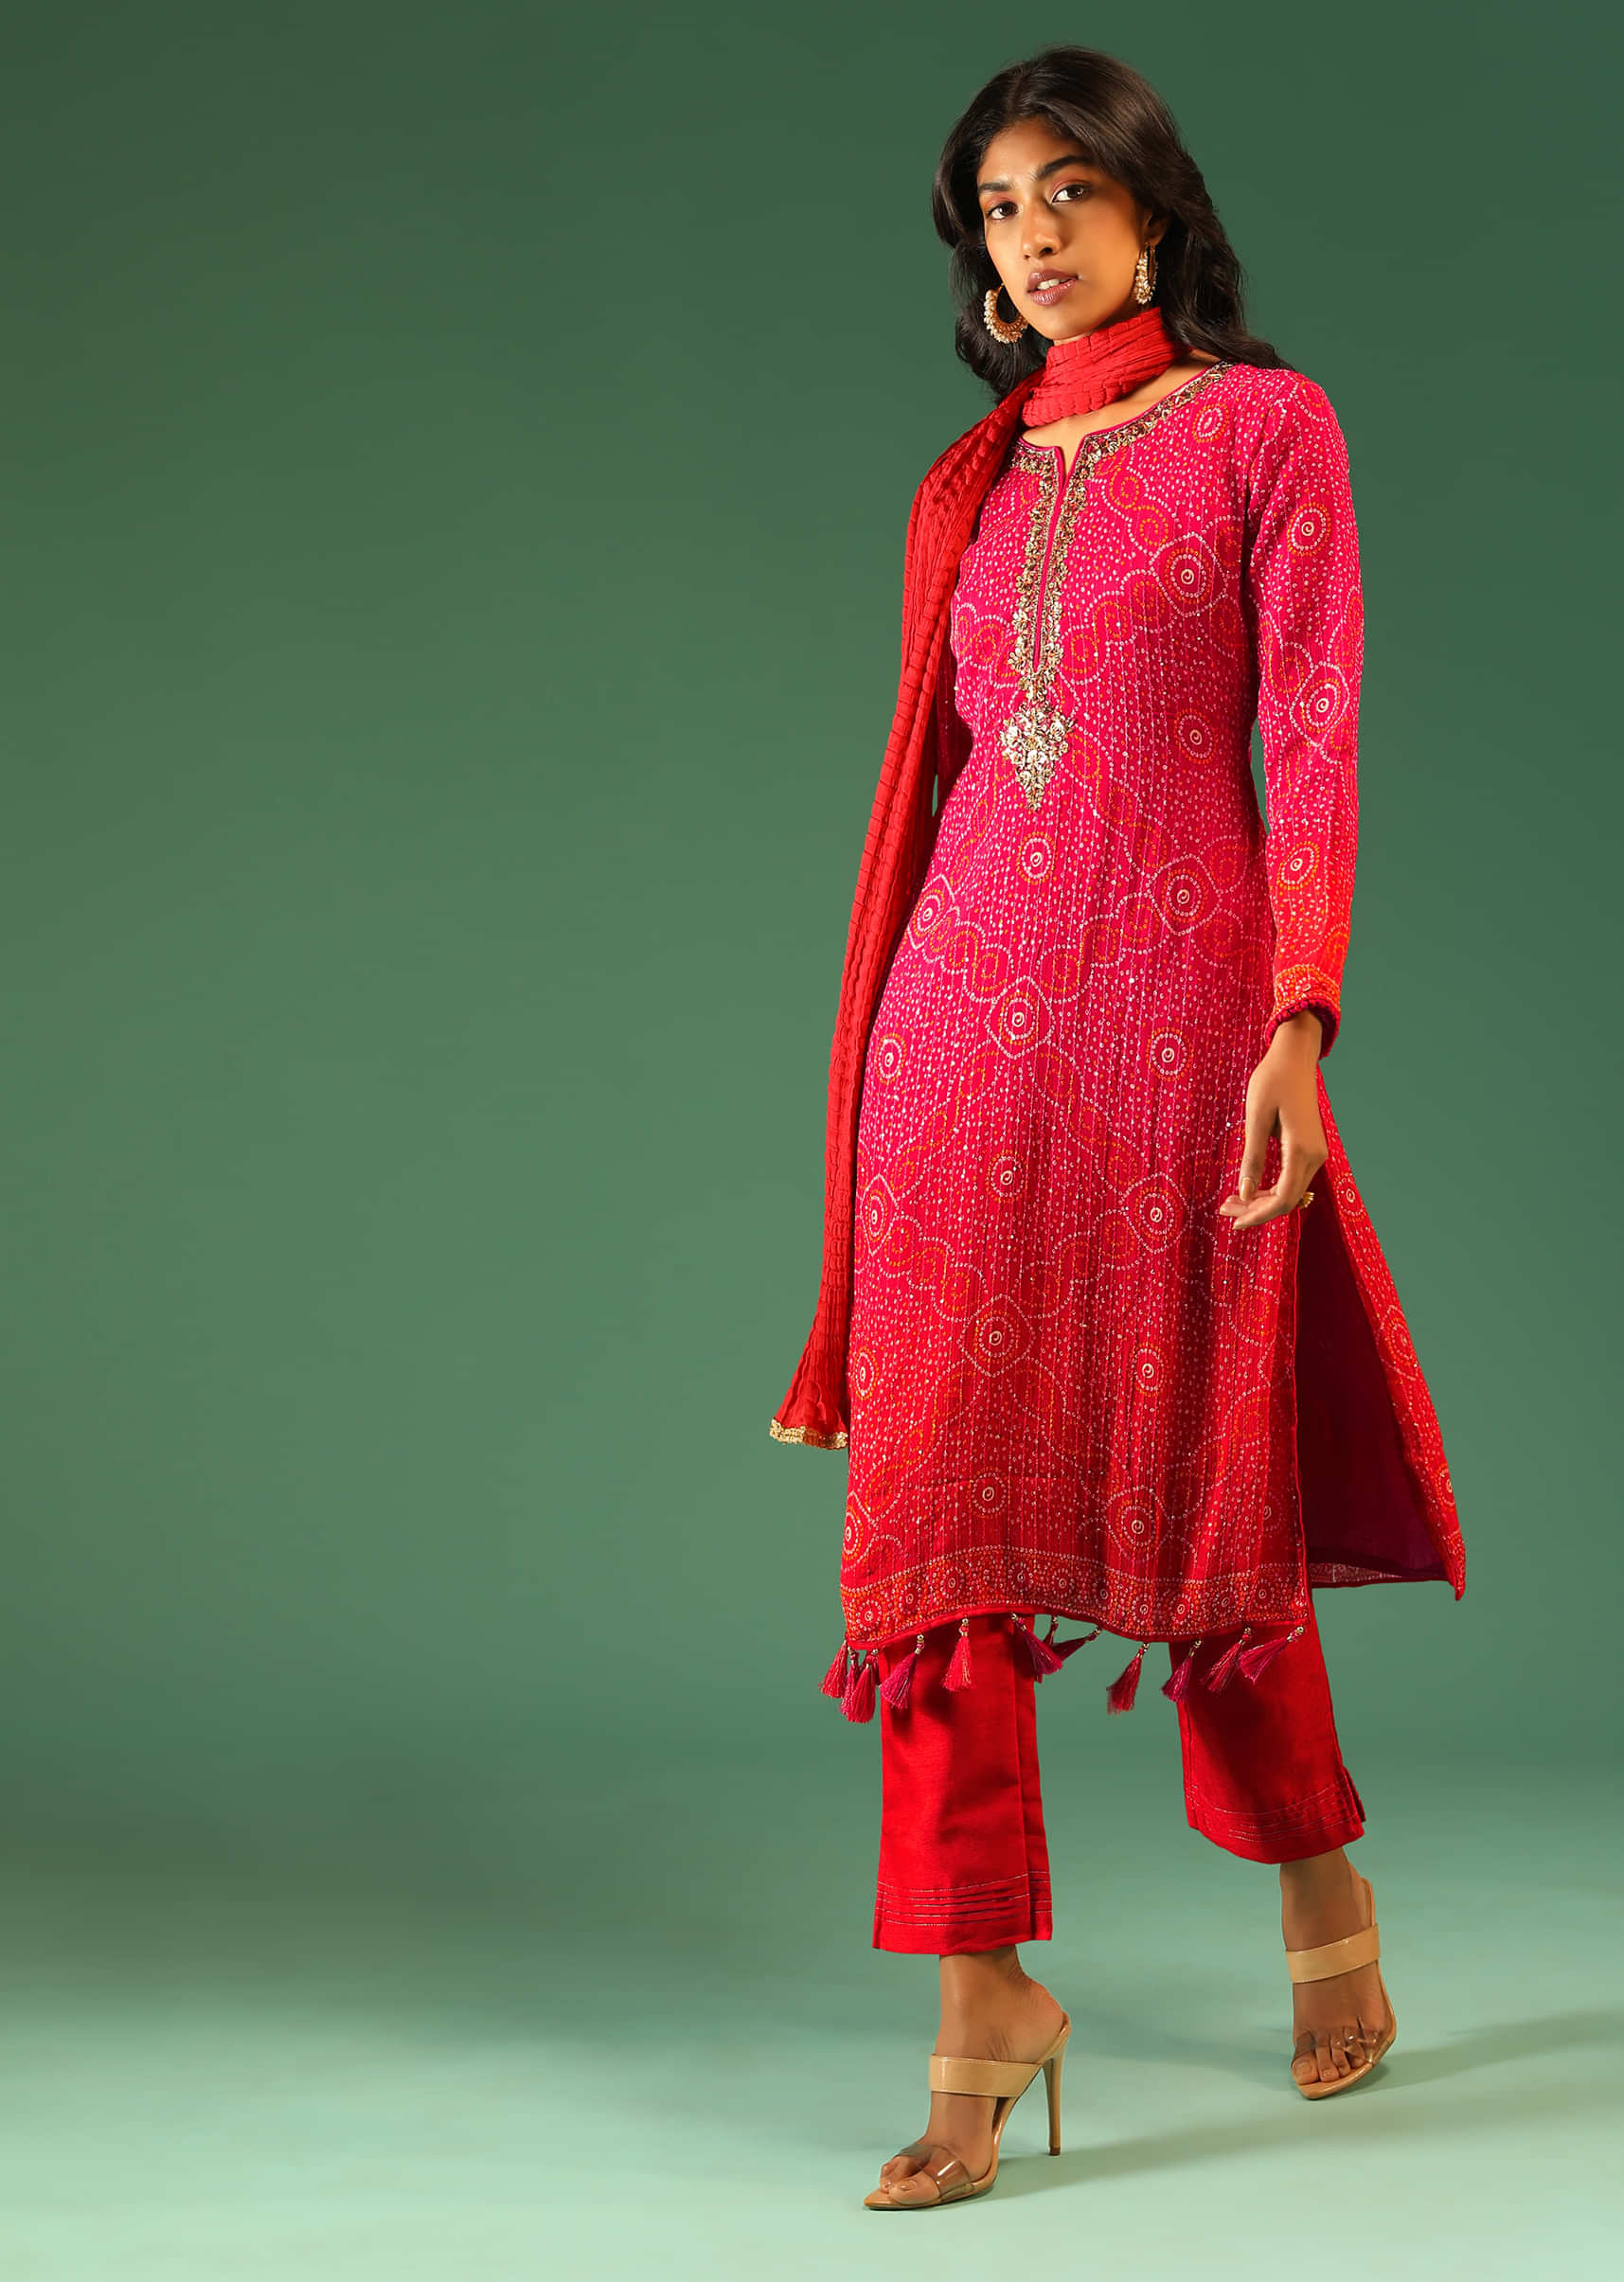 Hot Pink And Orange Shaded Straight Cut Suit In Chiffon With Bandhani Design All Over And Tassels On The Hem  